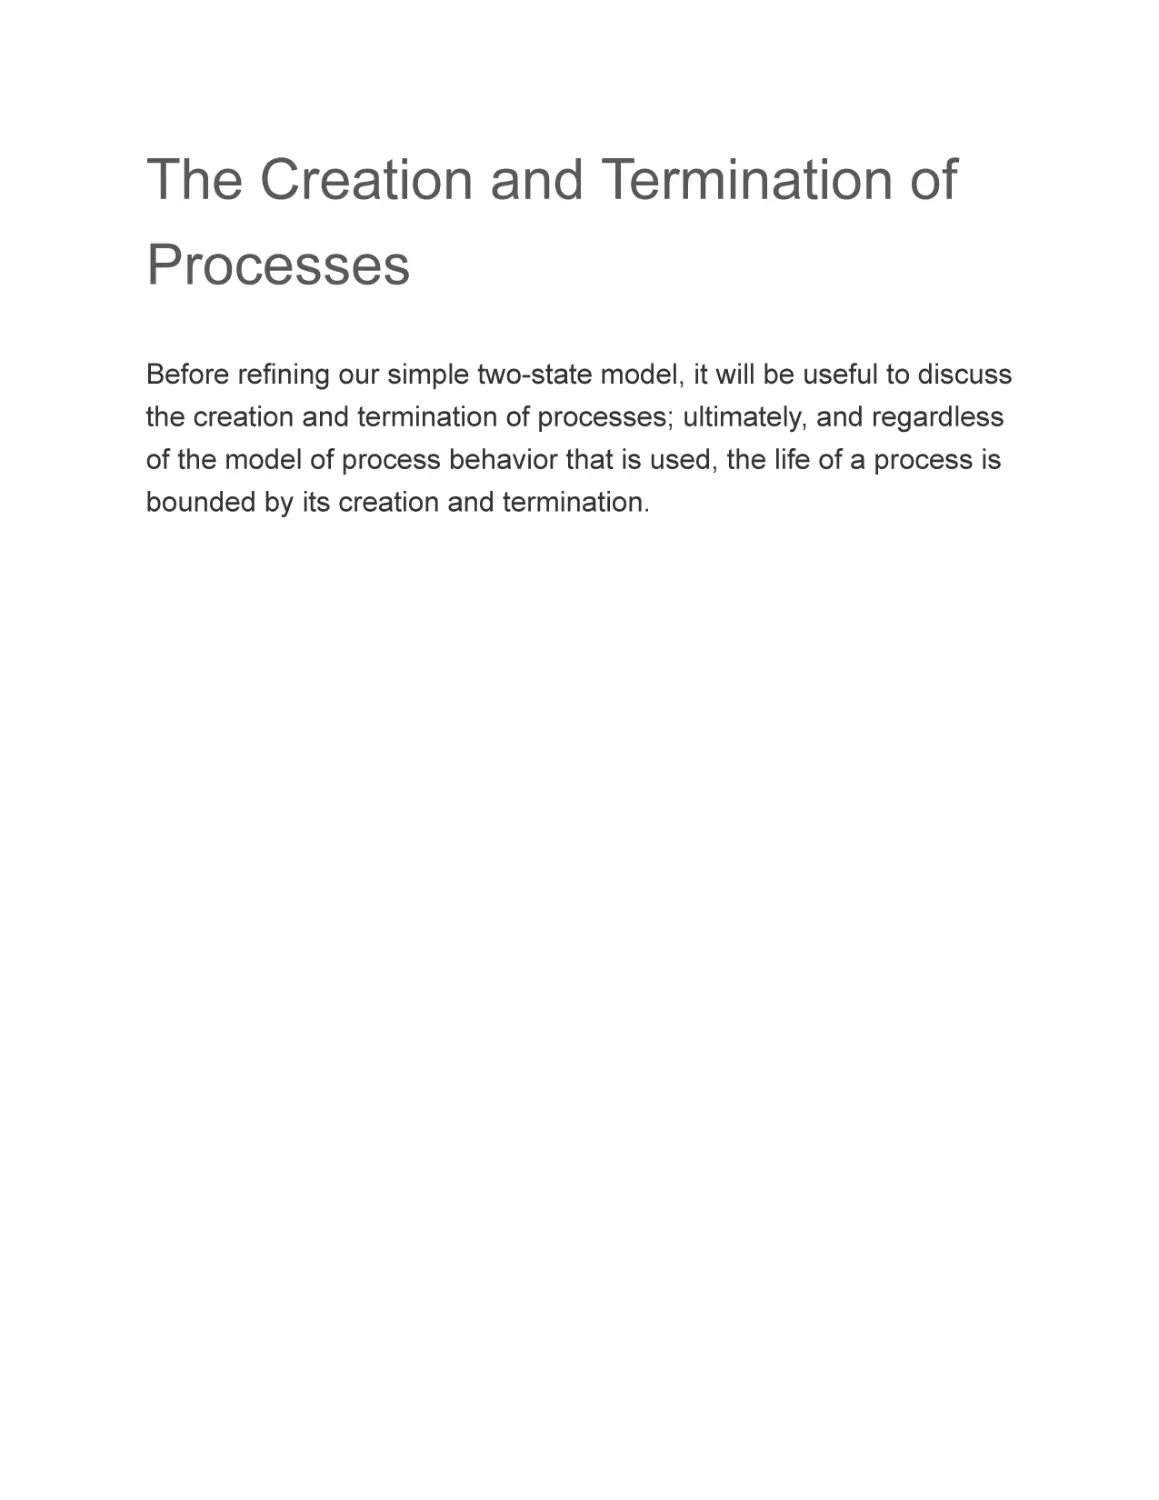 The Creation and Termination of Processes